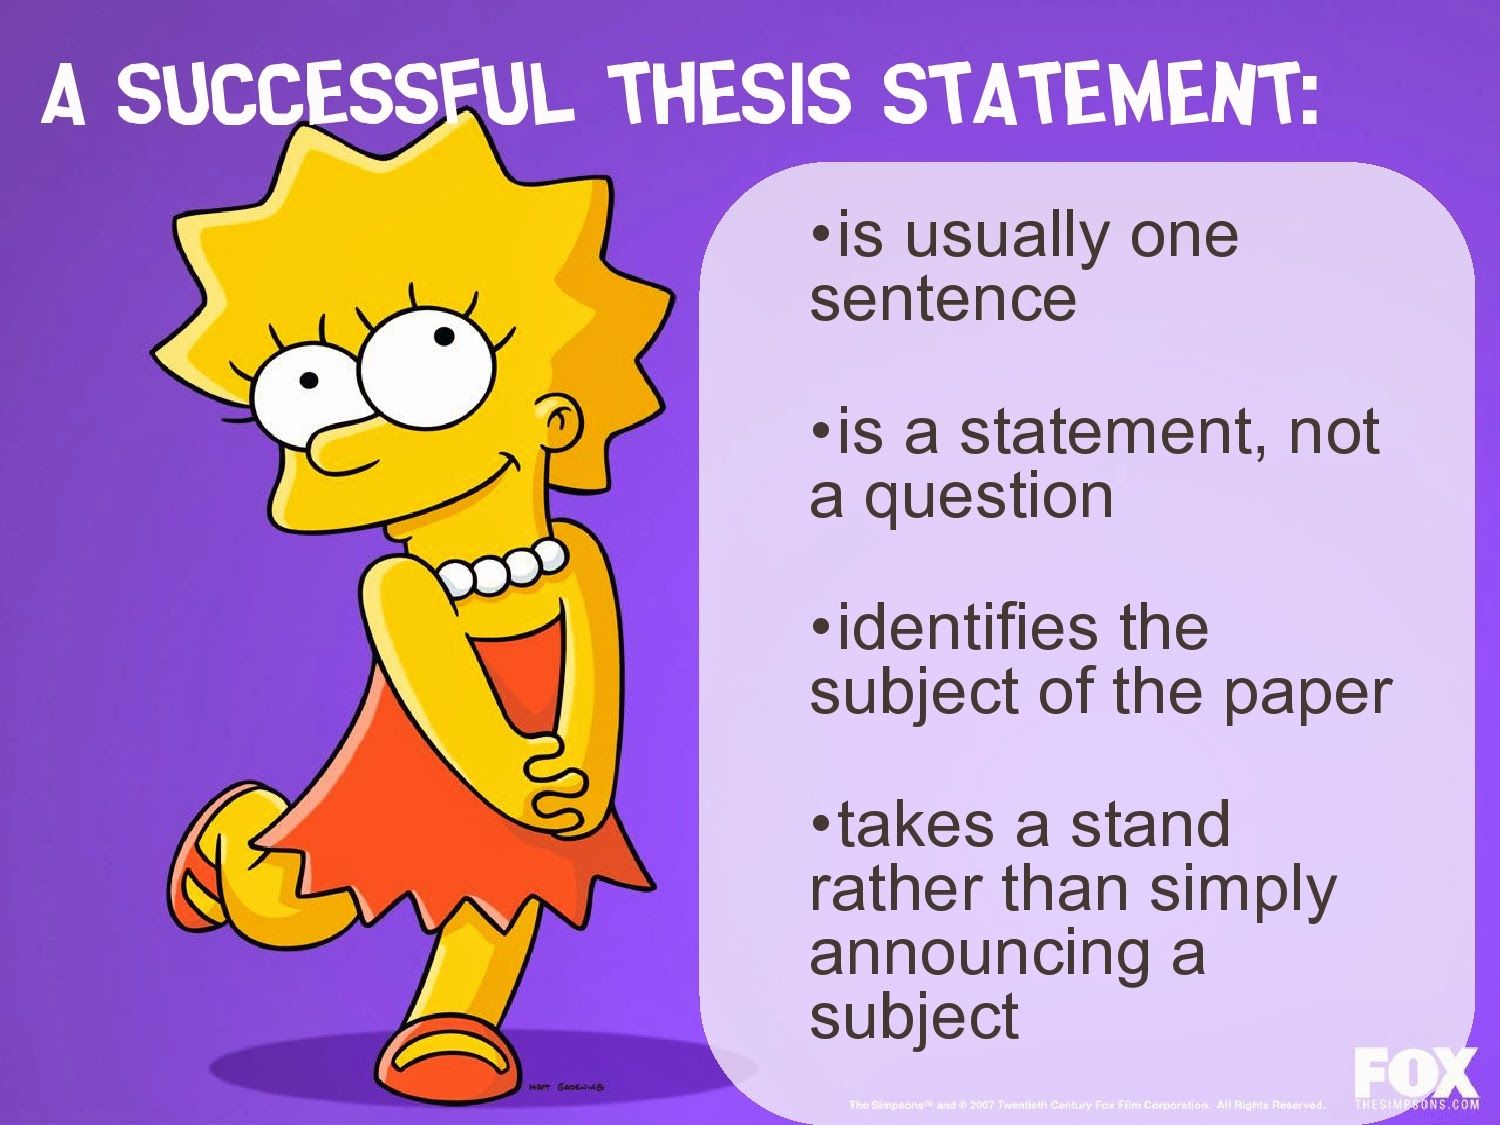 Get Examples of Good Thesis Statements